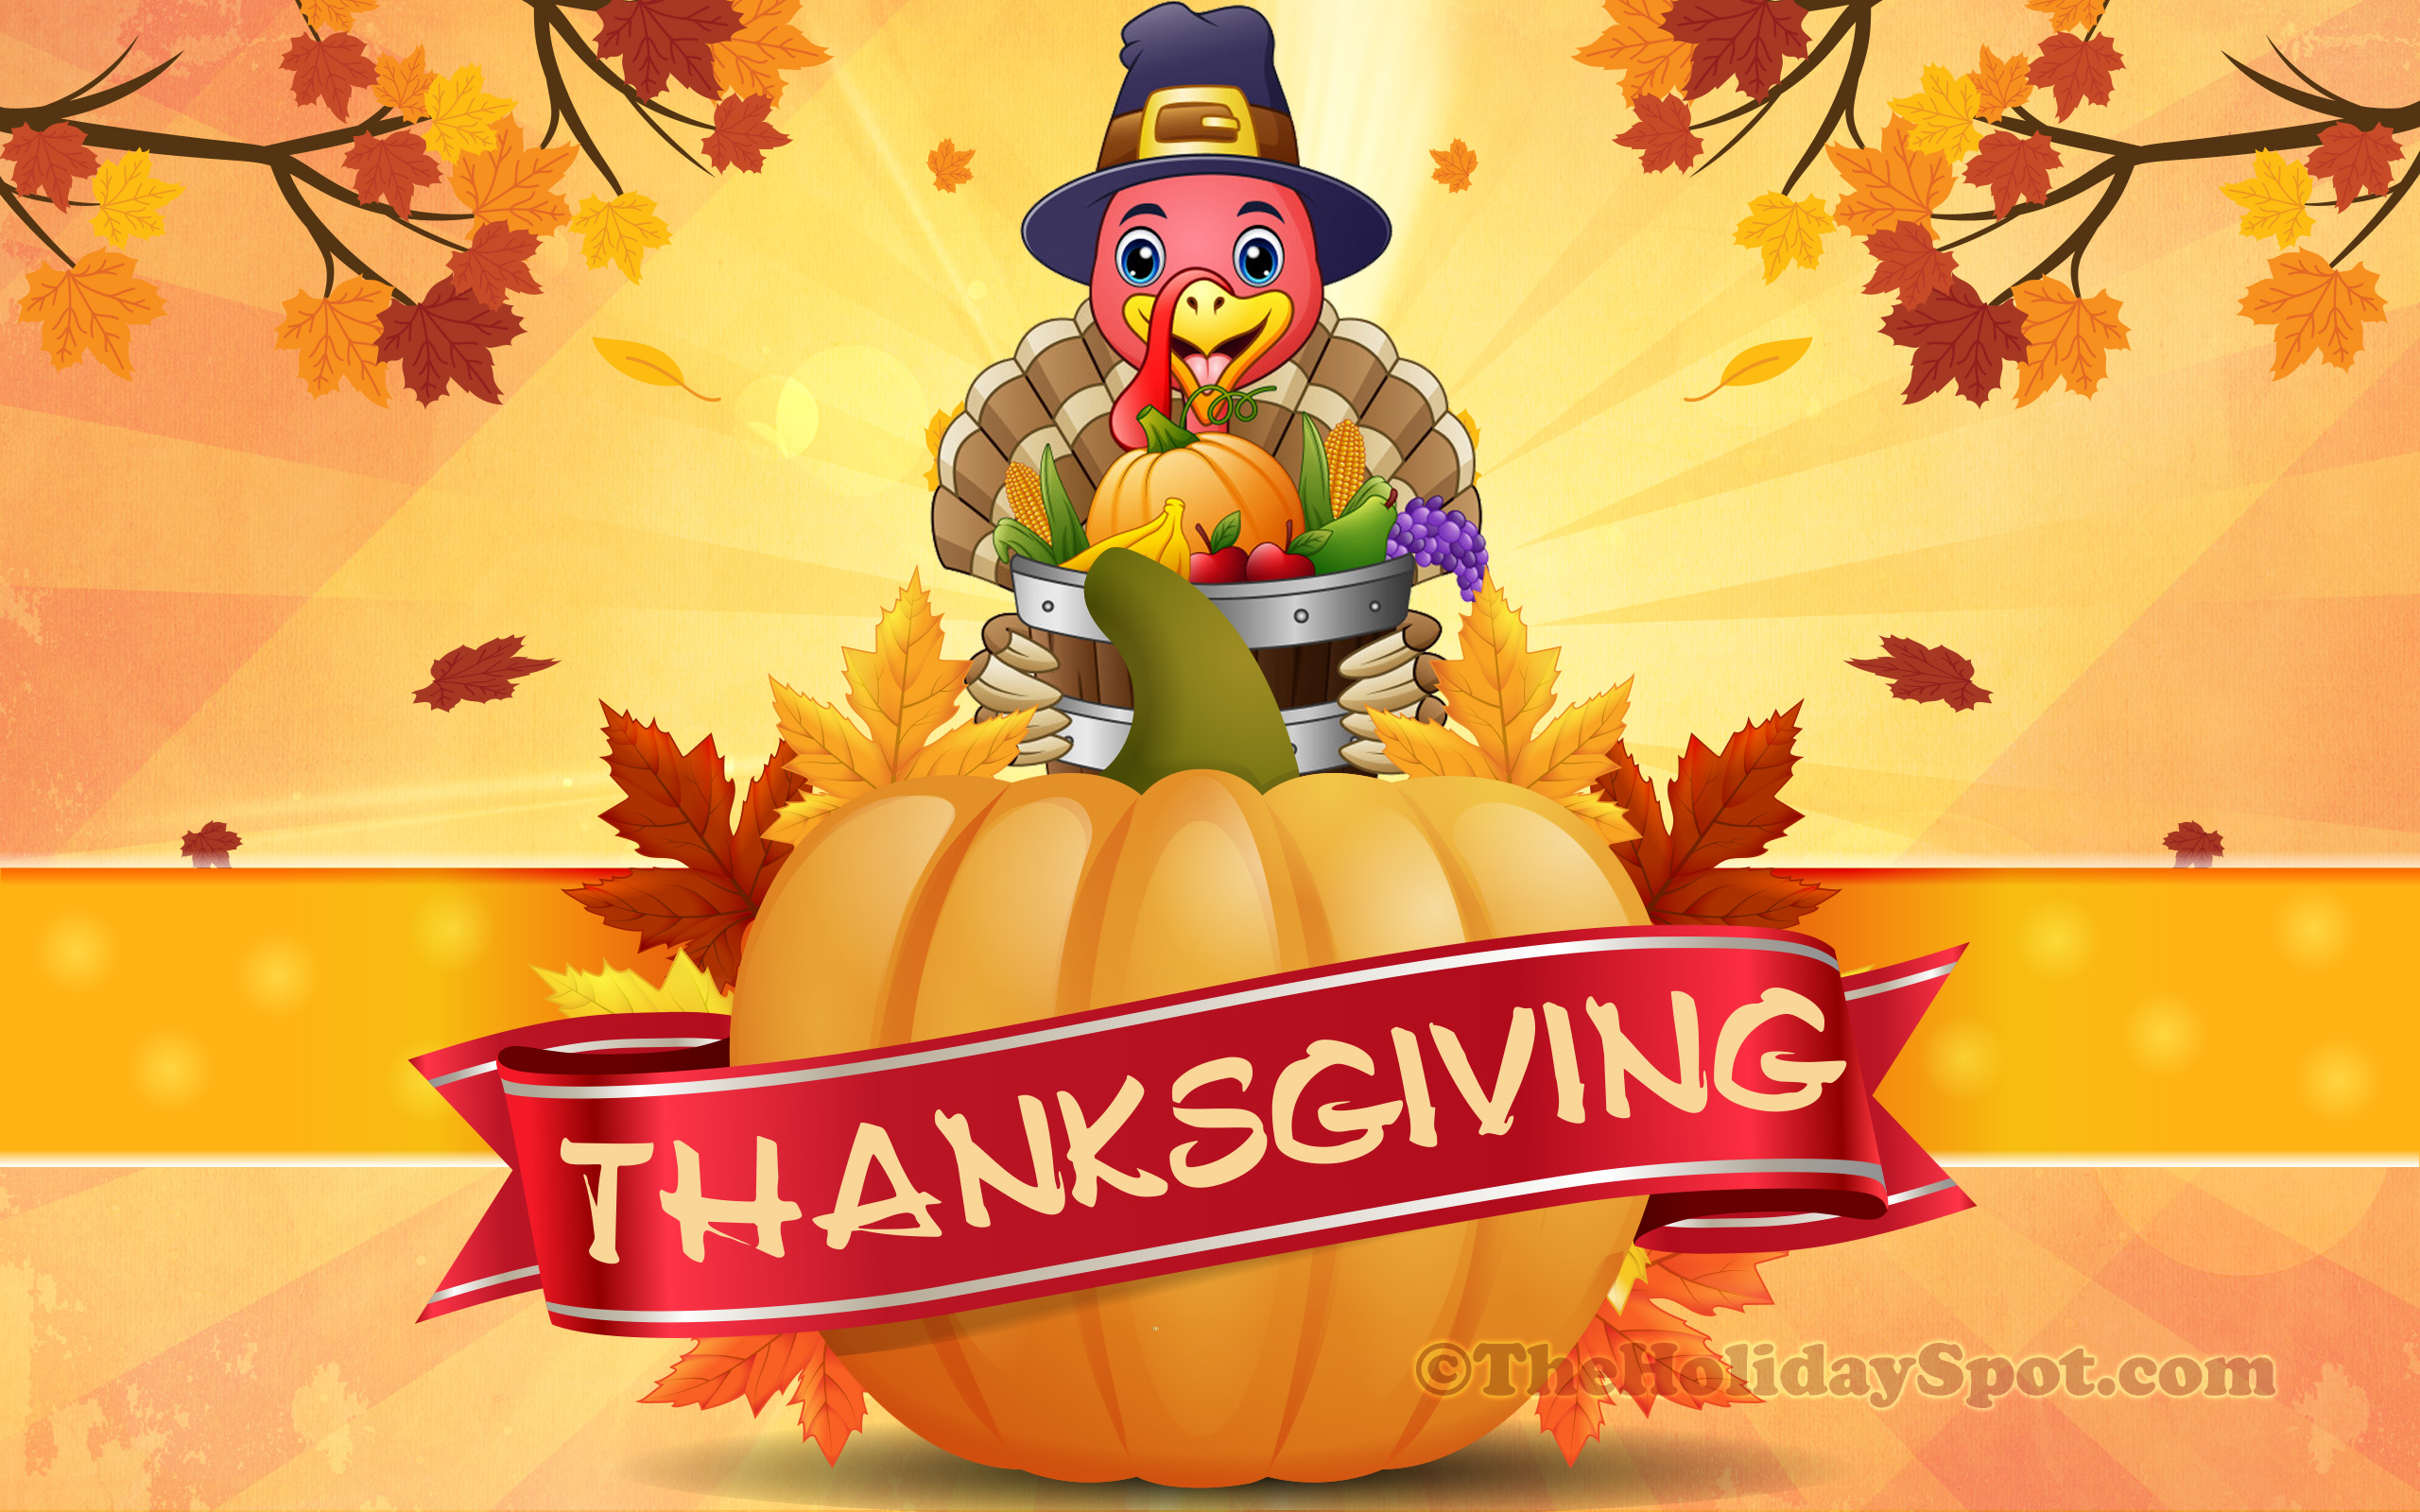 Thanksgiving Wallpapers HD  Happy Thanksgiving Wallpaper Desktop and  Backgrounds Images